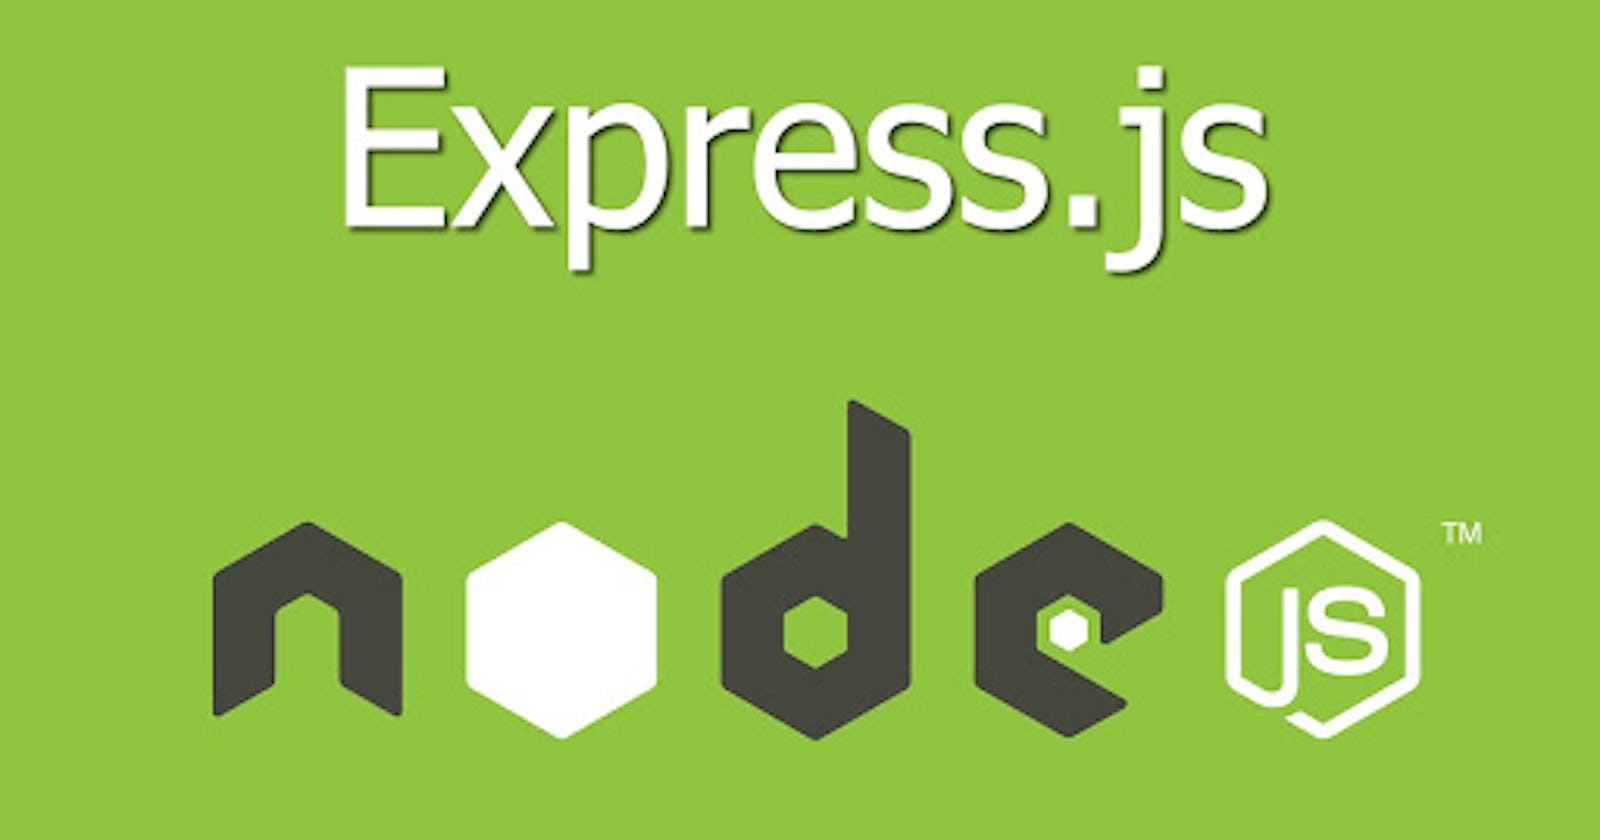 Why Node.js + Express.js? (When there are better options)